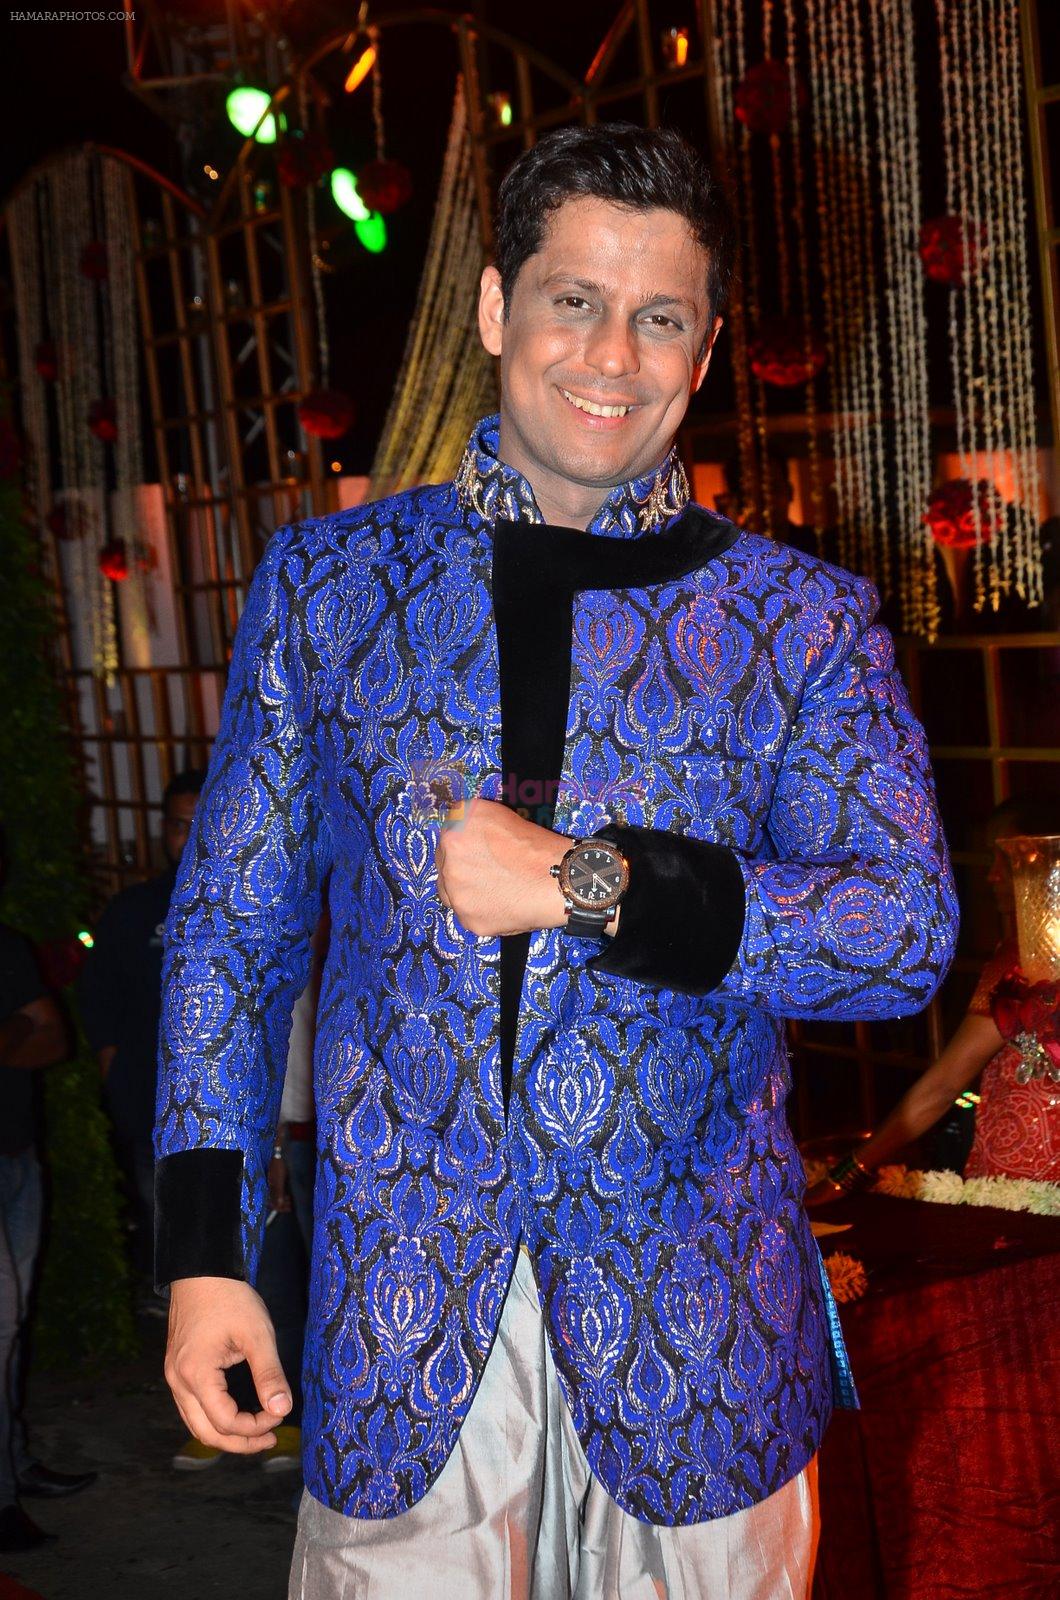 at Vikram Singh's Brother Uday and Ali Morani's daughter Shirin's Sangeet Ceremony in Blue sea on 20th Dec 2014